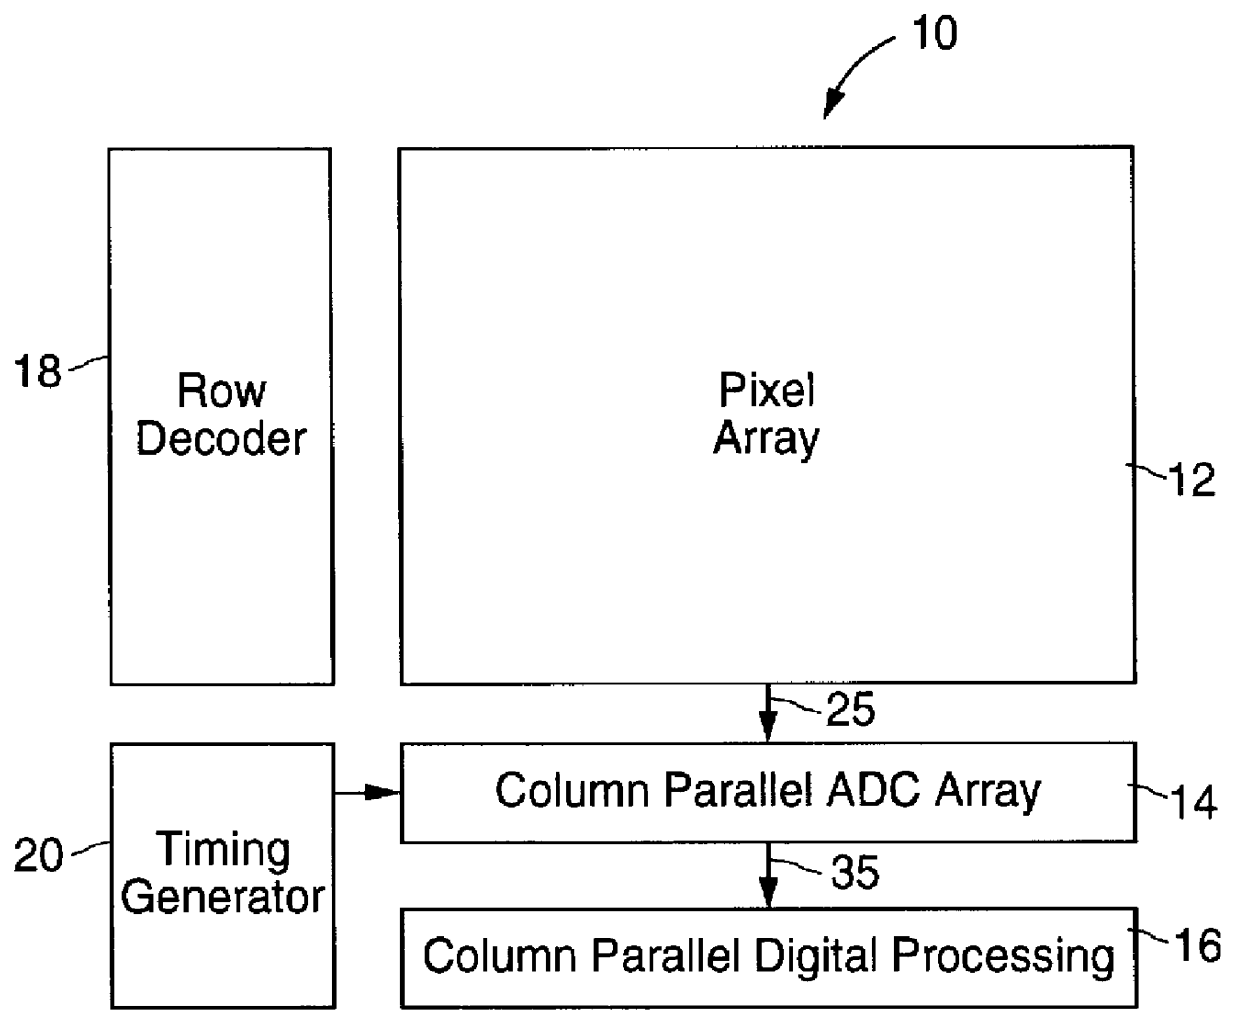 Low-power column parallel ADC in CMOS image sensors